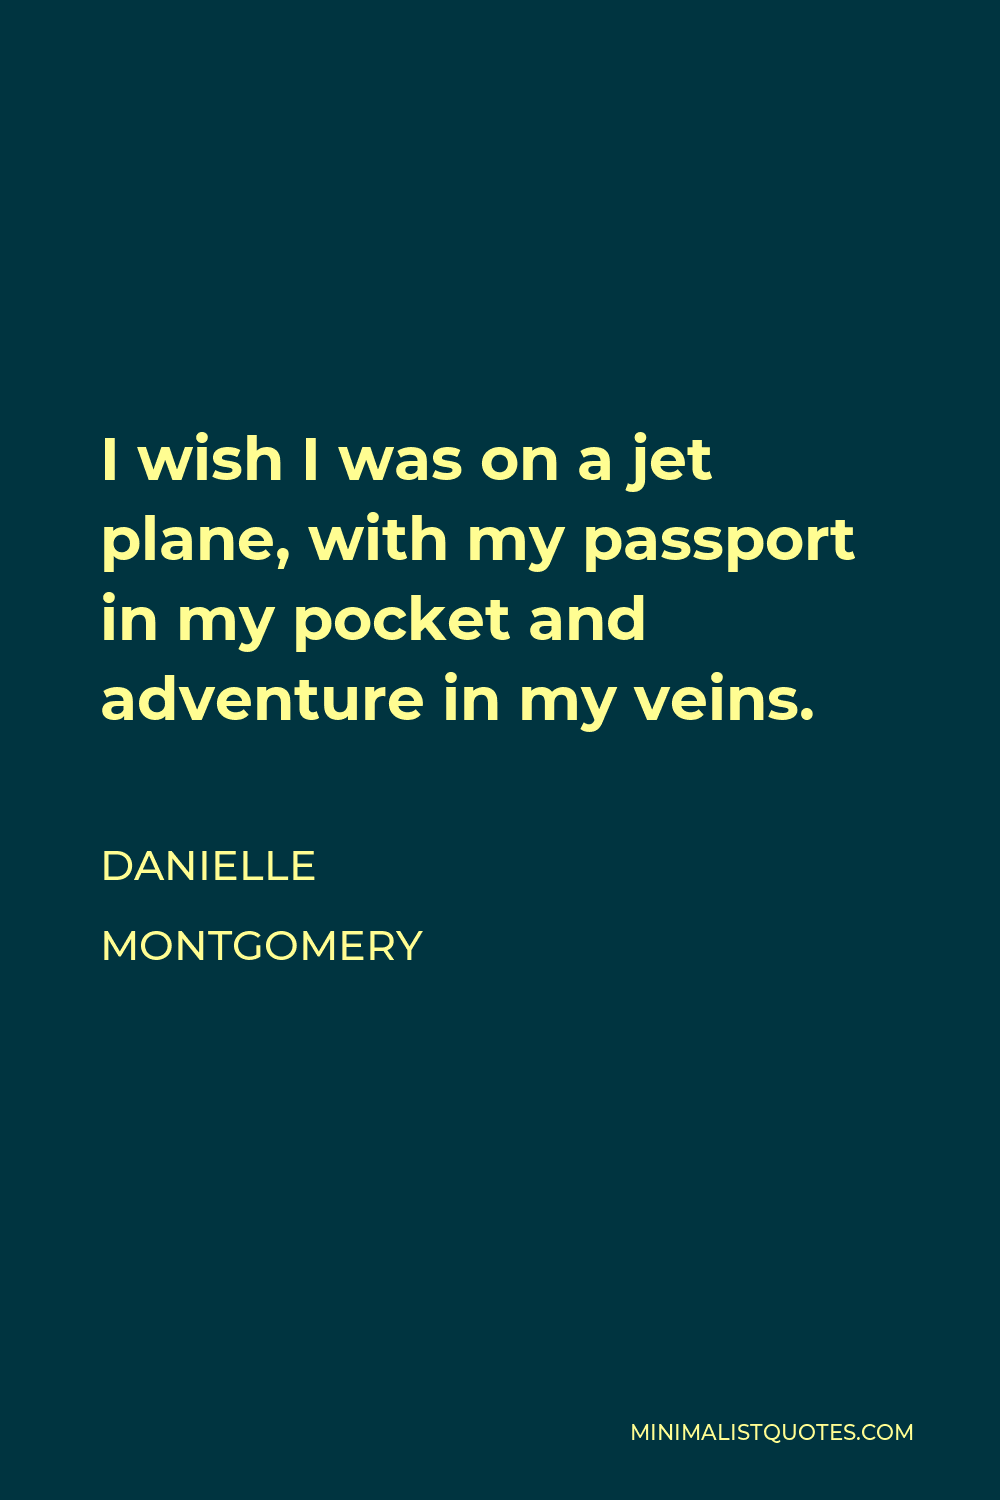 Danielle Montgomery Quote - I wish I was on a jet plane, with my passport in my pocket and adventure in my veins.